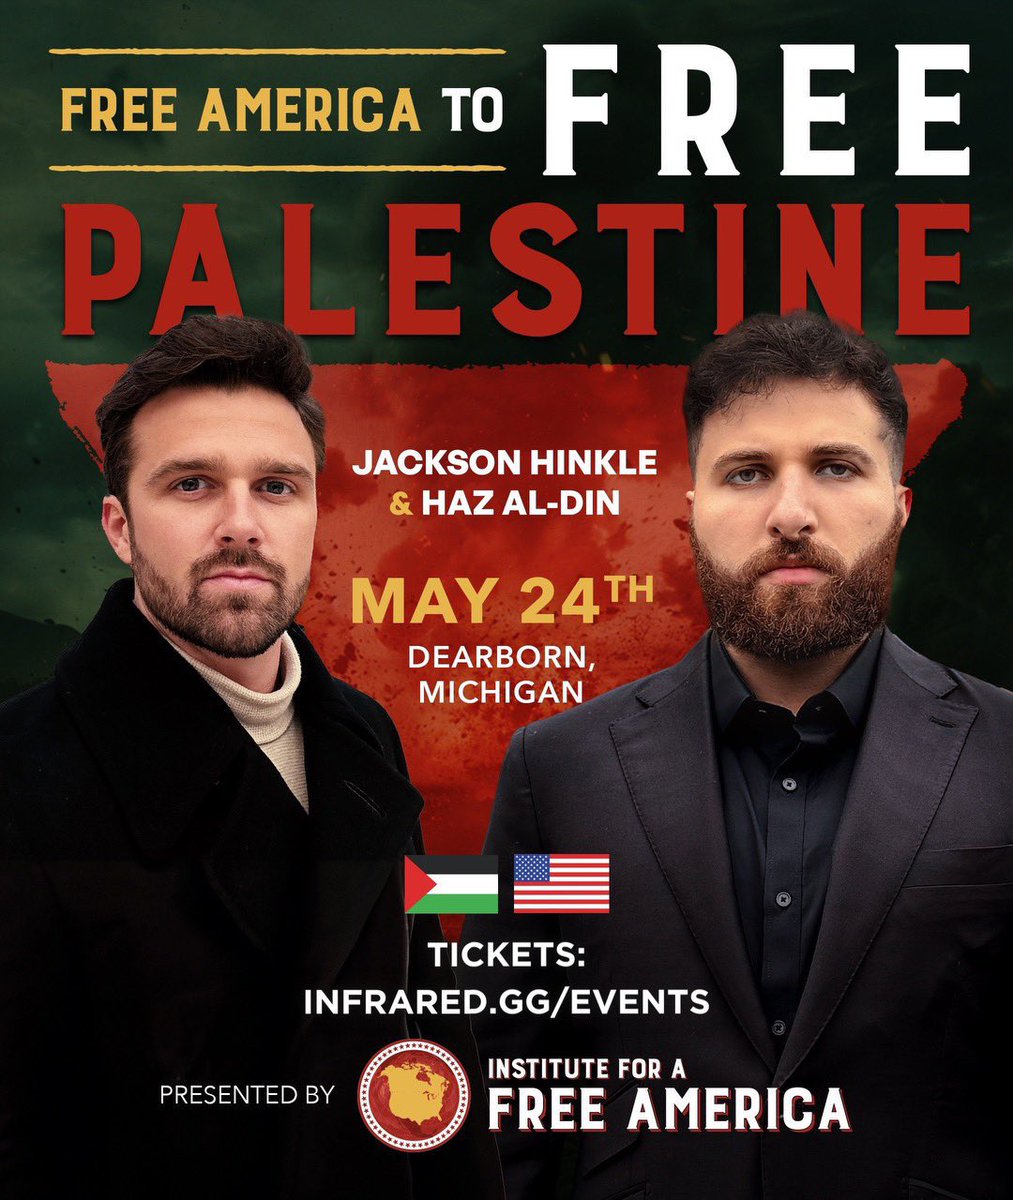 On May 24th, in Dearborn, Michigan, an in-person event hosted by @jacksonhinklle and @InfraHaz will take place in support of Palestine from an American perspective. 🚨 Get your tickets while you can! 🇺🇸🇵🇸 FREE AMERICA TO FREE PALESTINE!